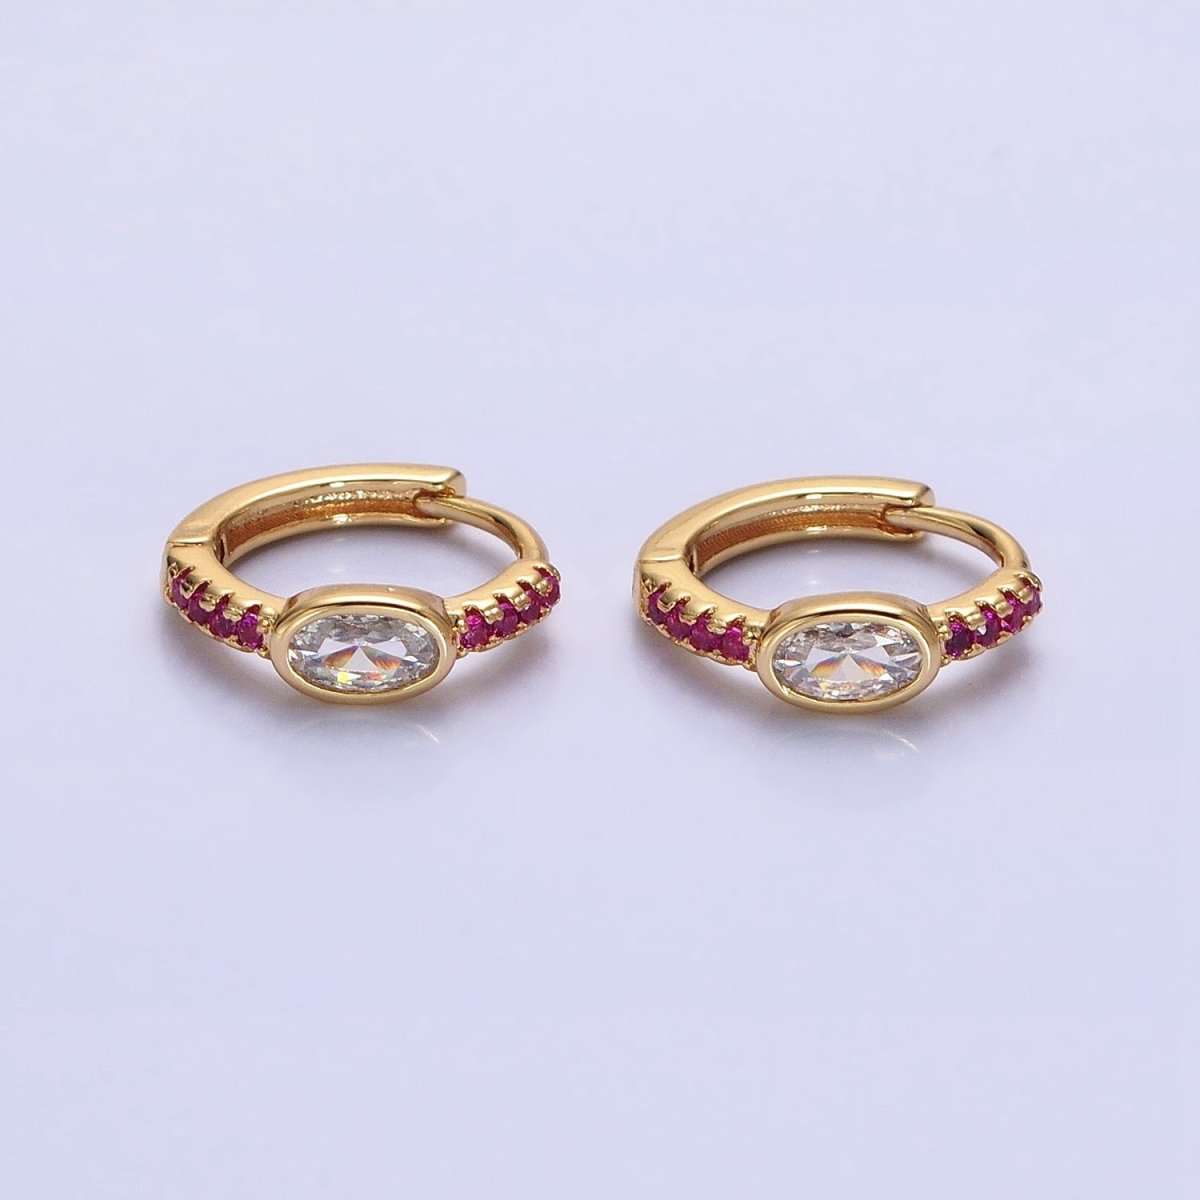 Silver, Gold Fuchsia Micro Paved Lined Clear Oval CZ 13mm Cartilage Huggie Earrings | AB814 AB826 - DLUXCA